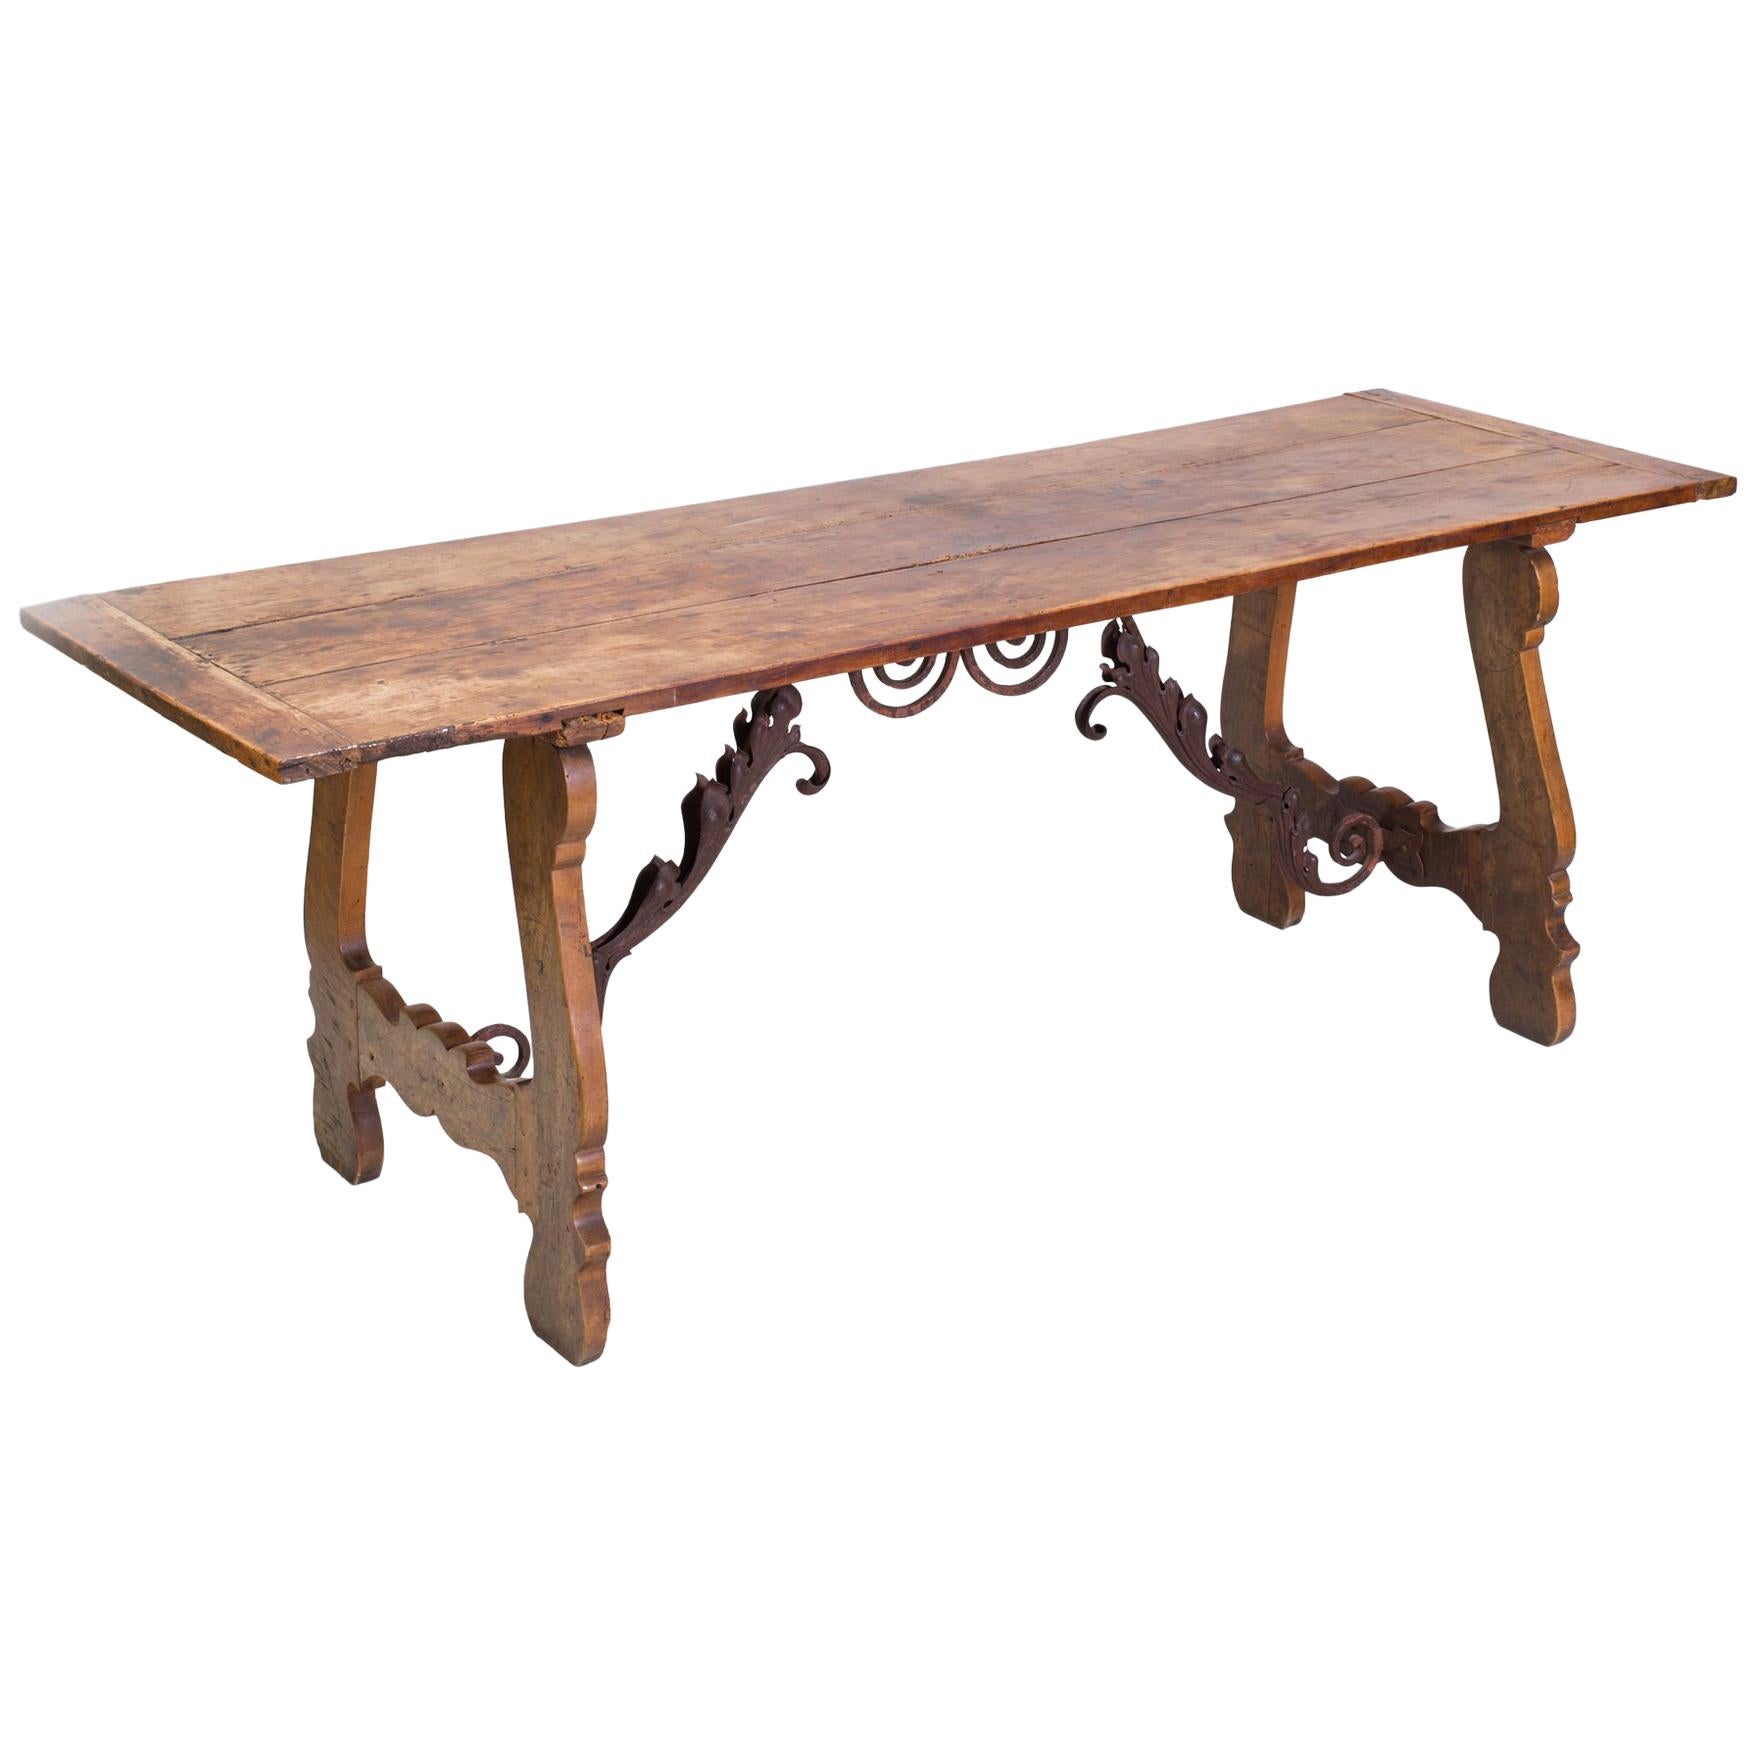 Early 19th Century Spanish Baroque-Style Elm Dining Table